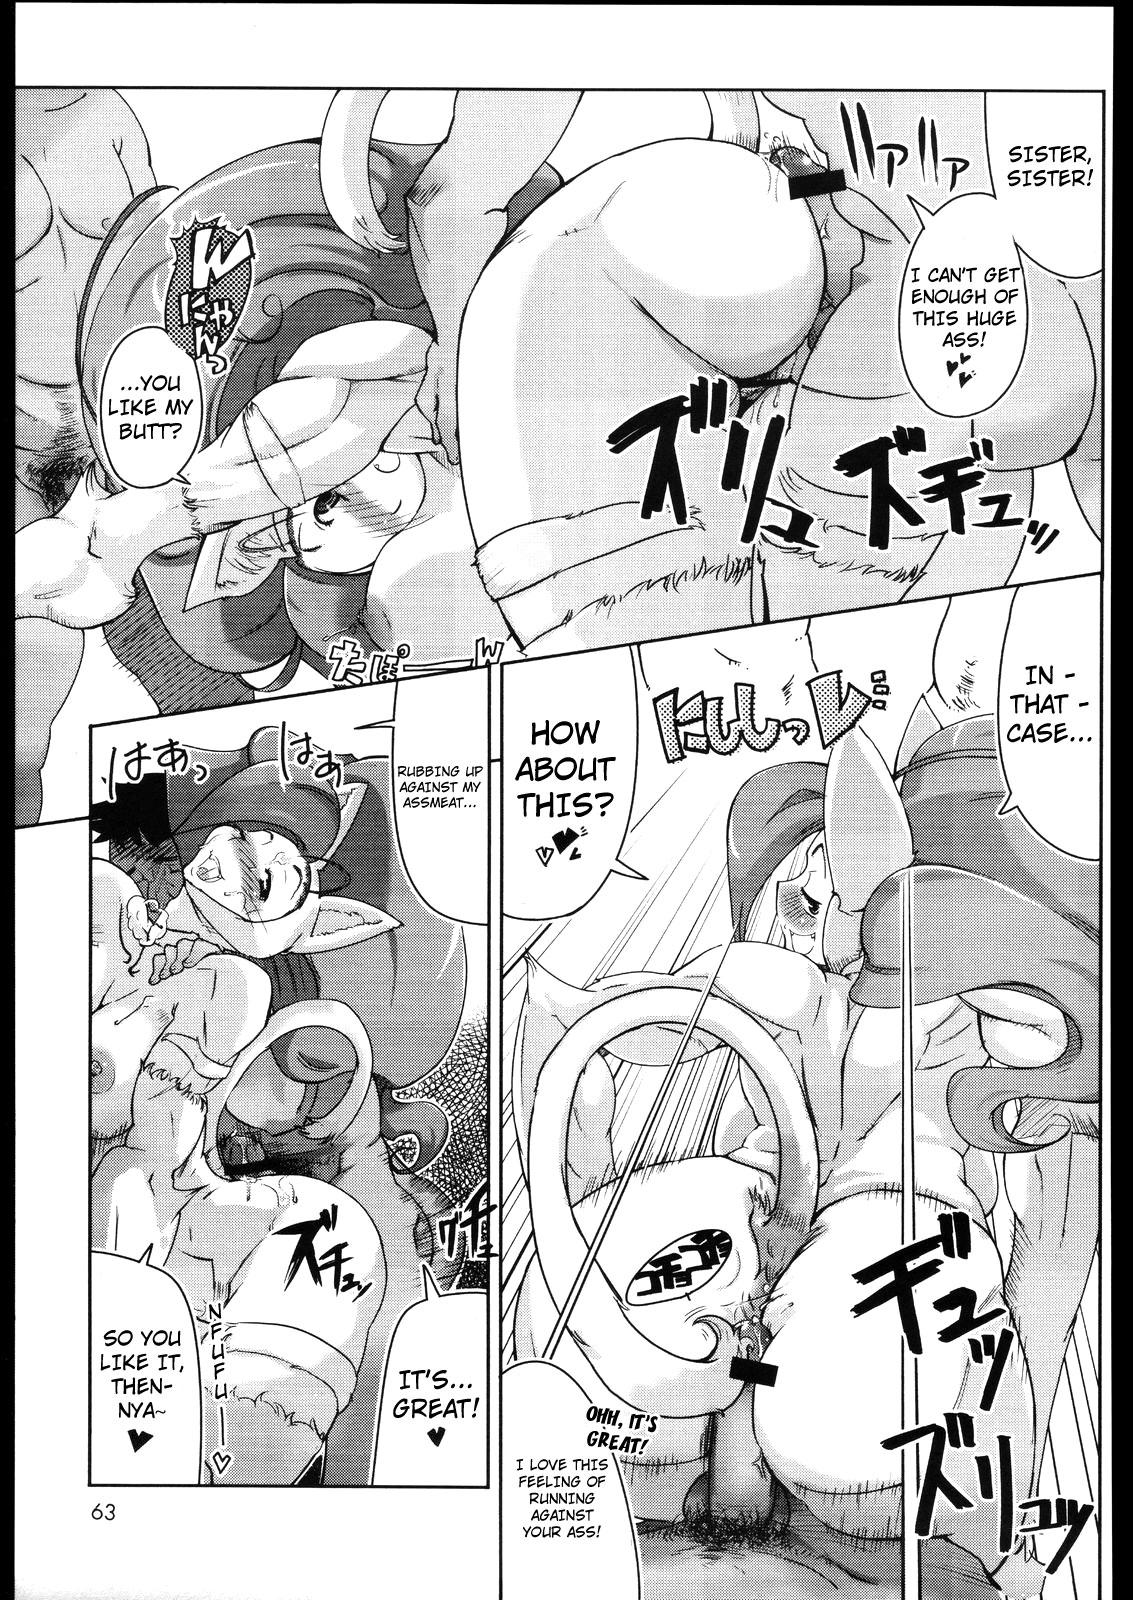 Playing Always Cheerful! - Darkstalkers Ass - Page 9